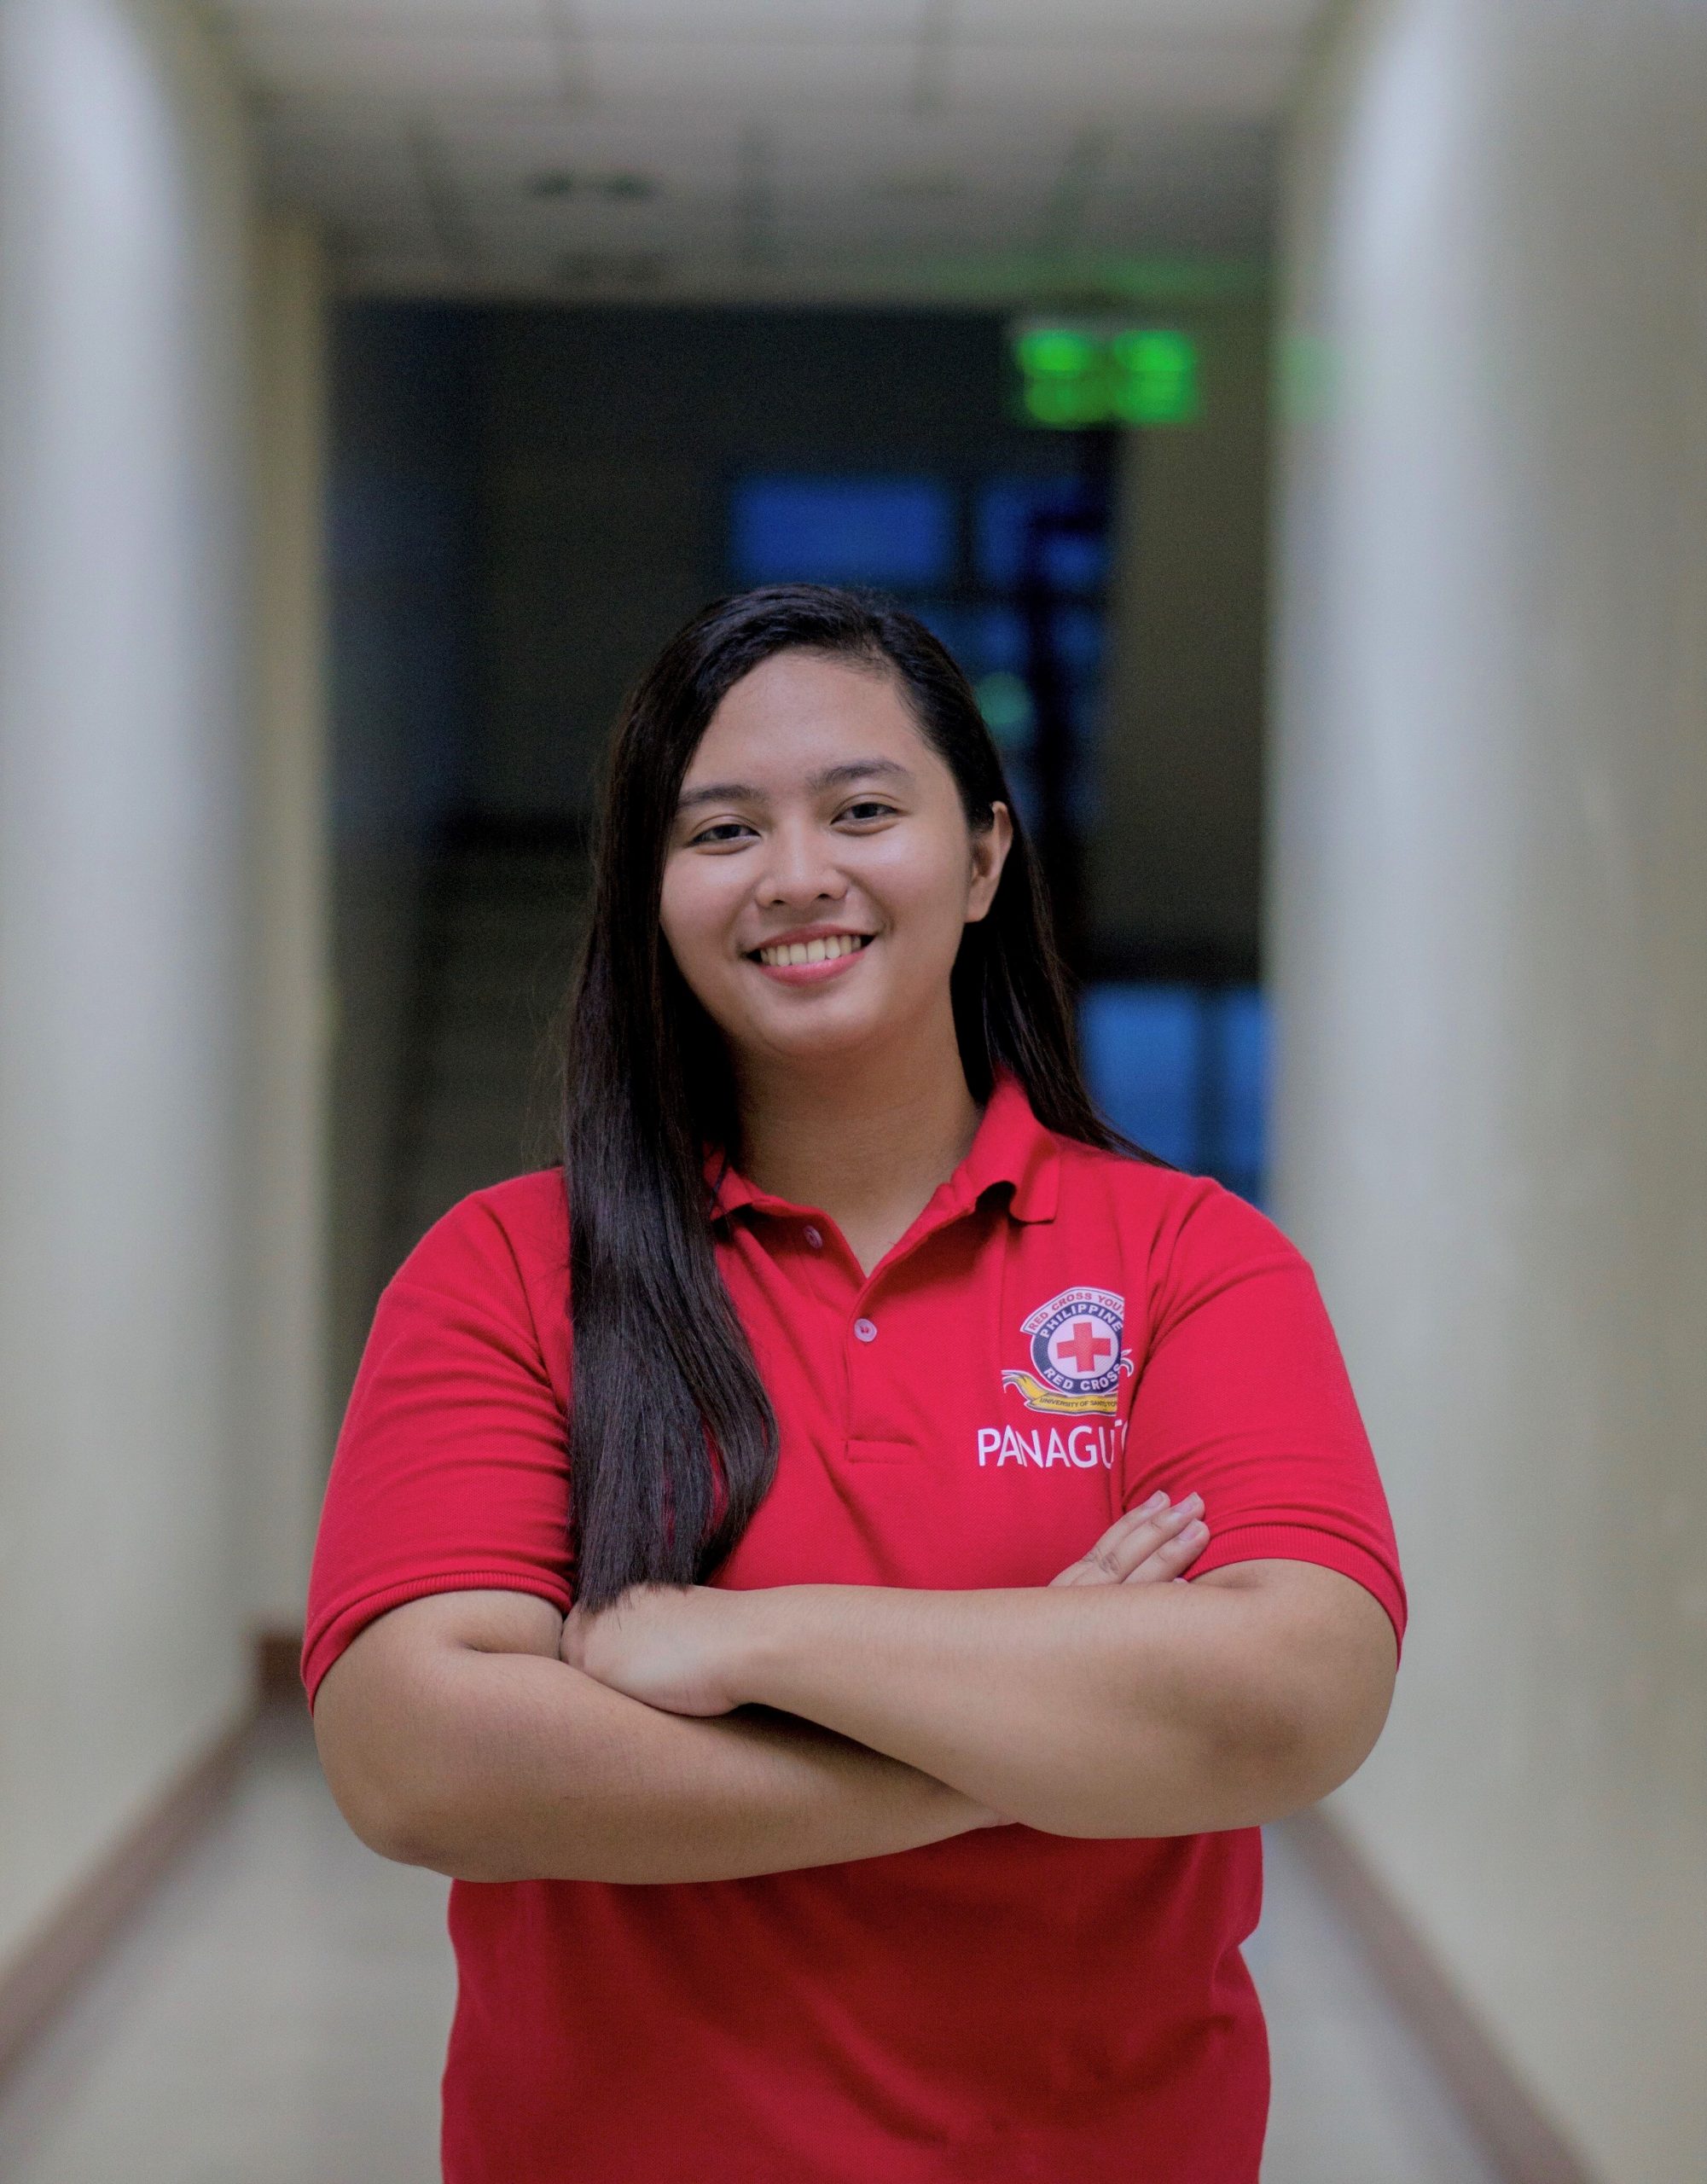 Grace Panaguiton: Between life and survival